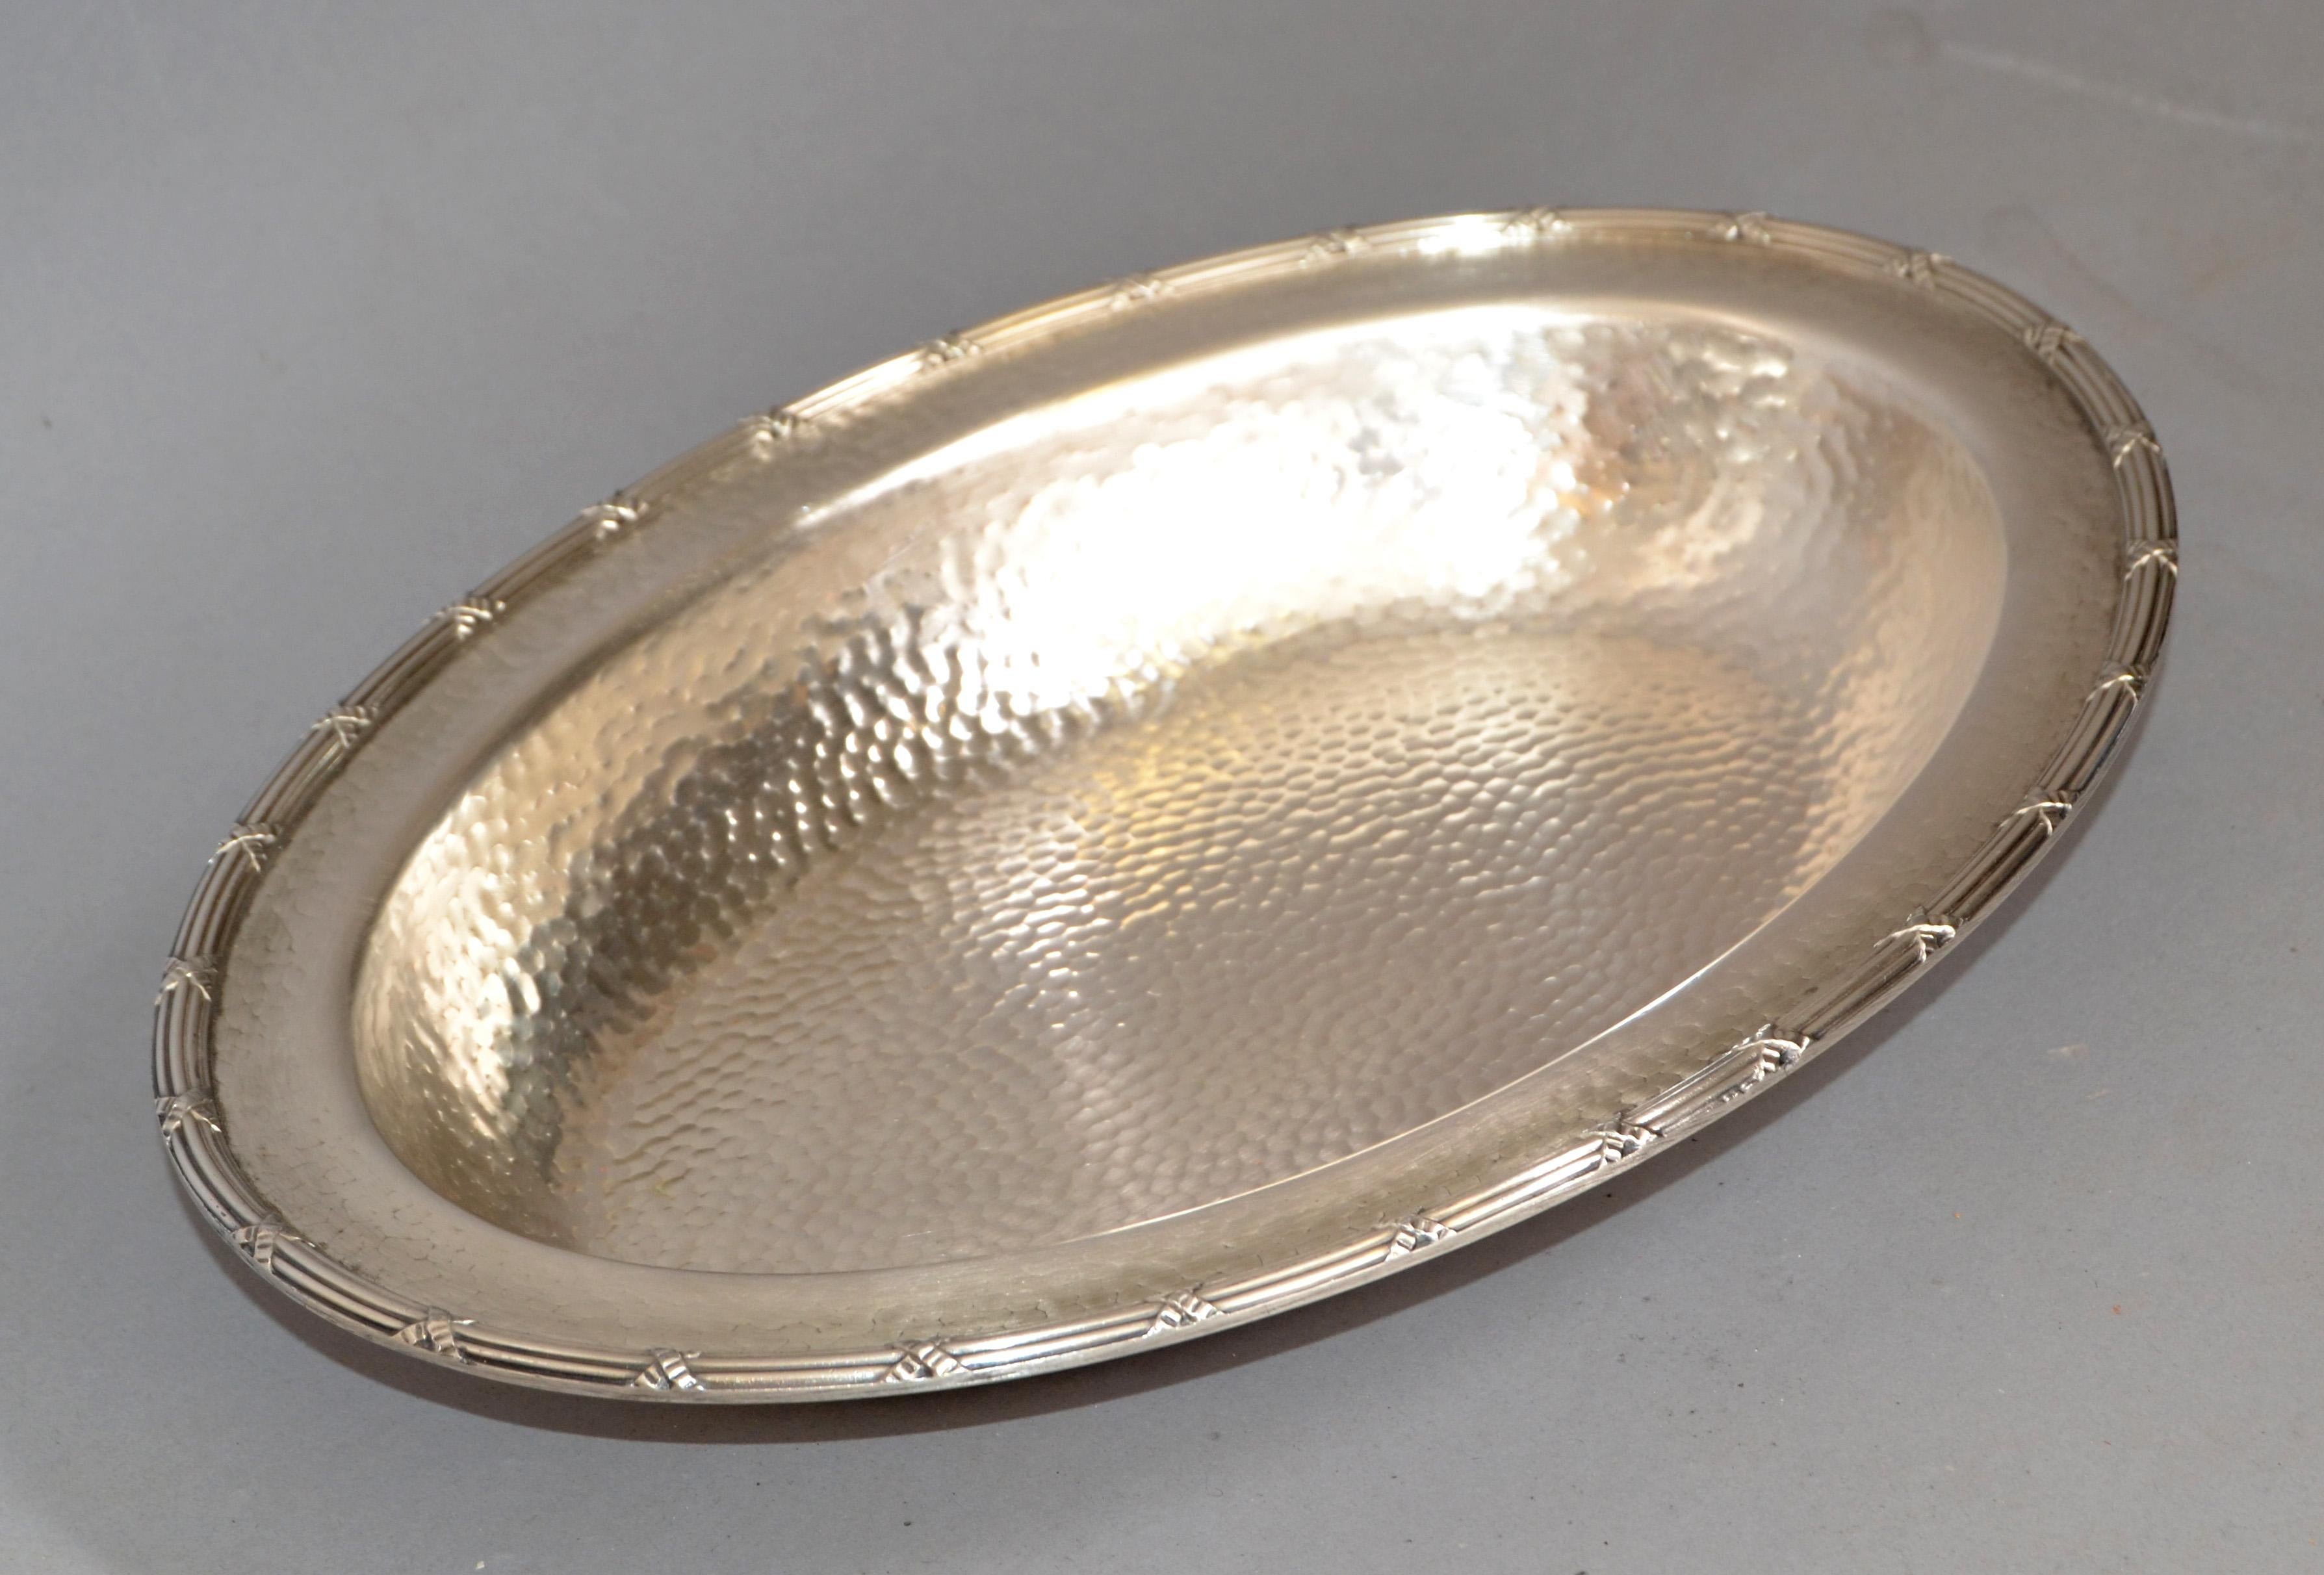 Metal Art Deco 1969 Hand-Hammered Silver Plate EPNS 2245 Centerpiece Decorative Bowl For Sale